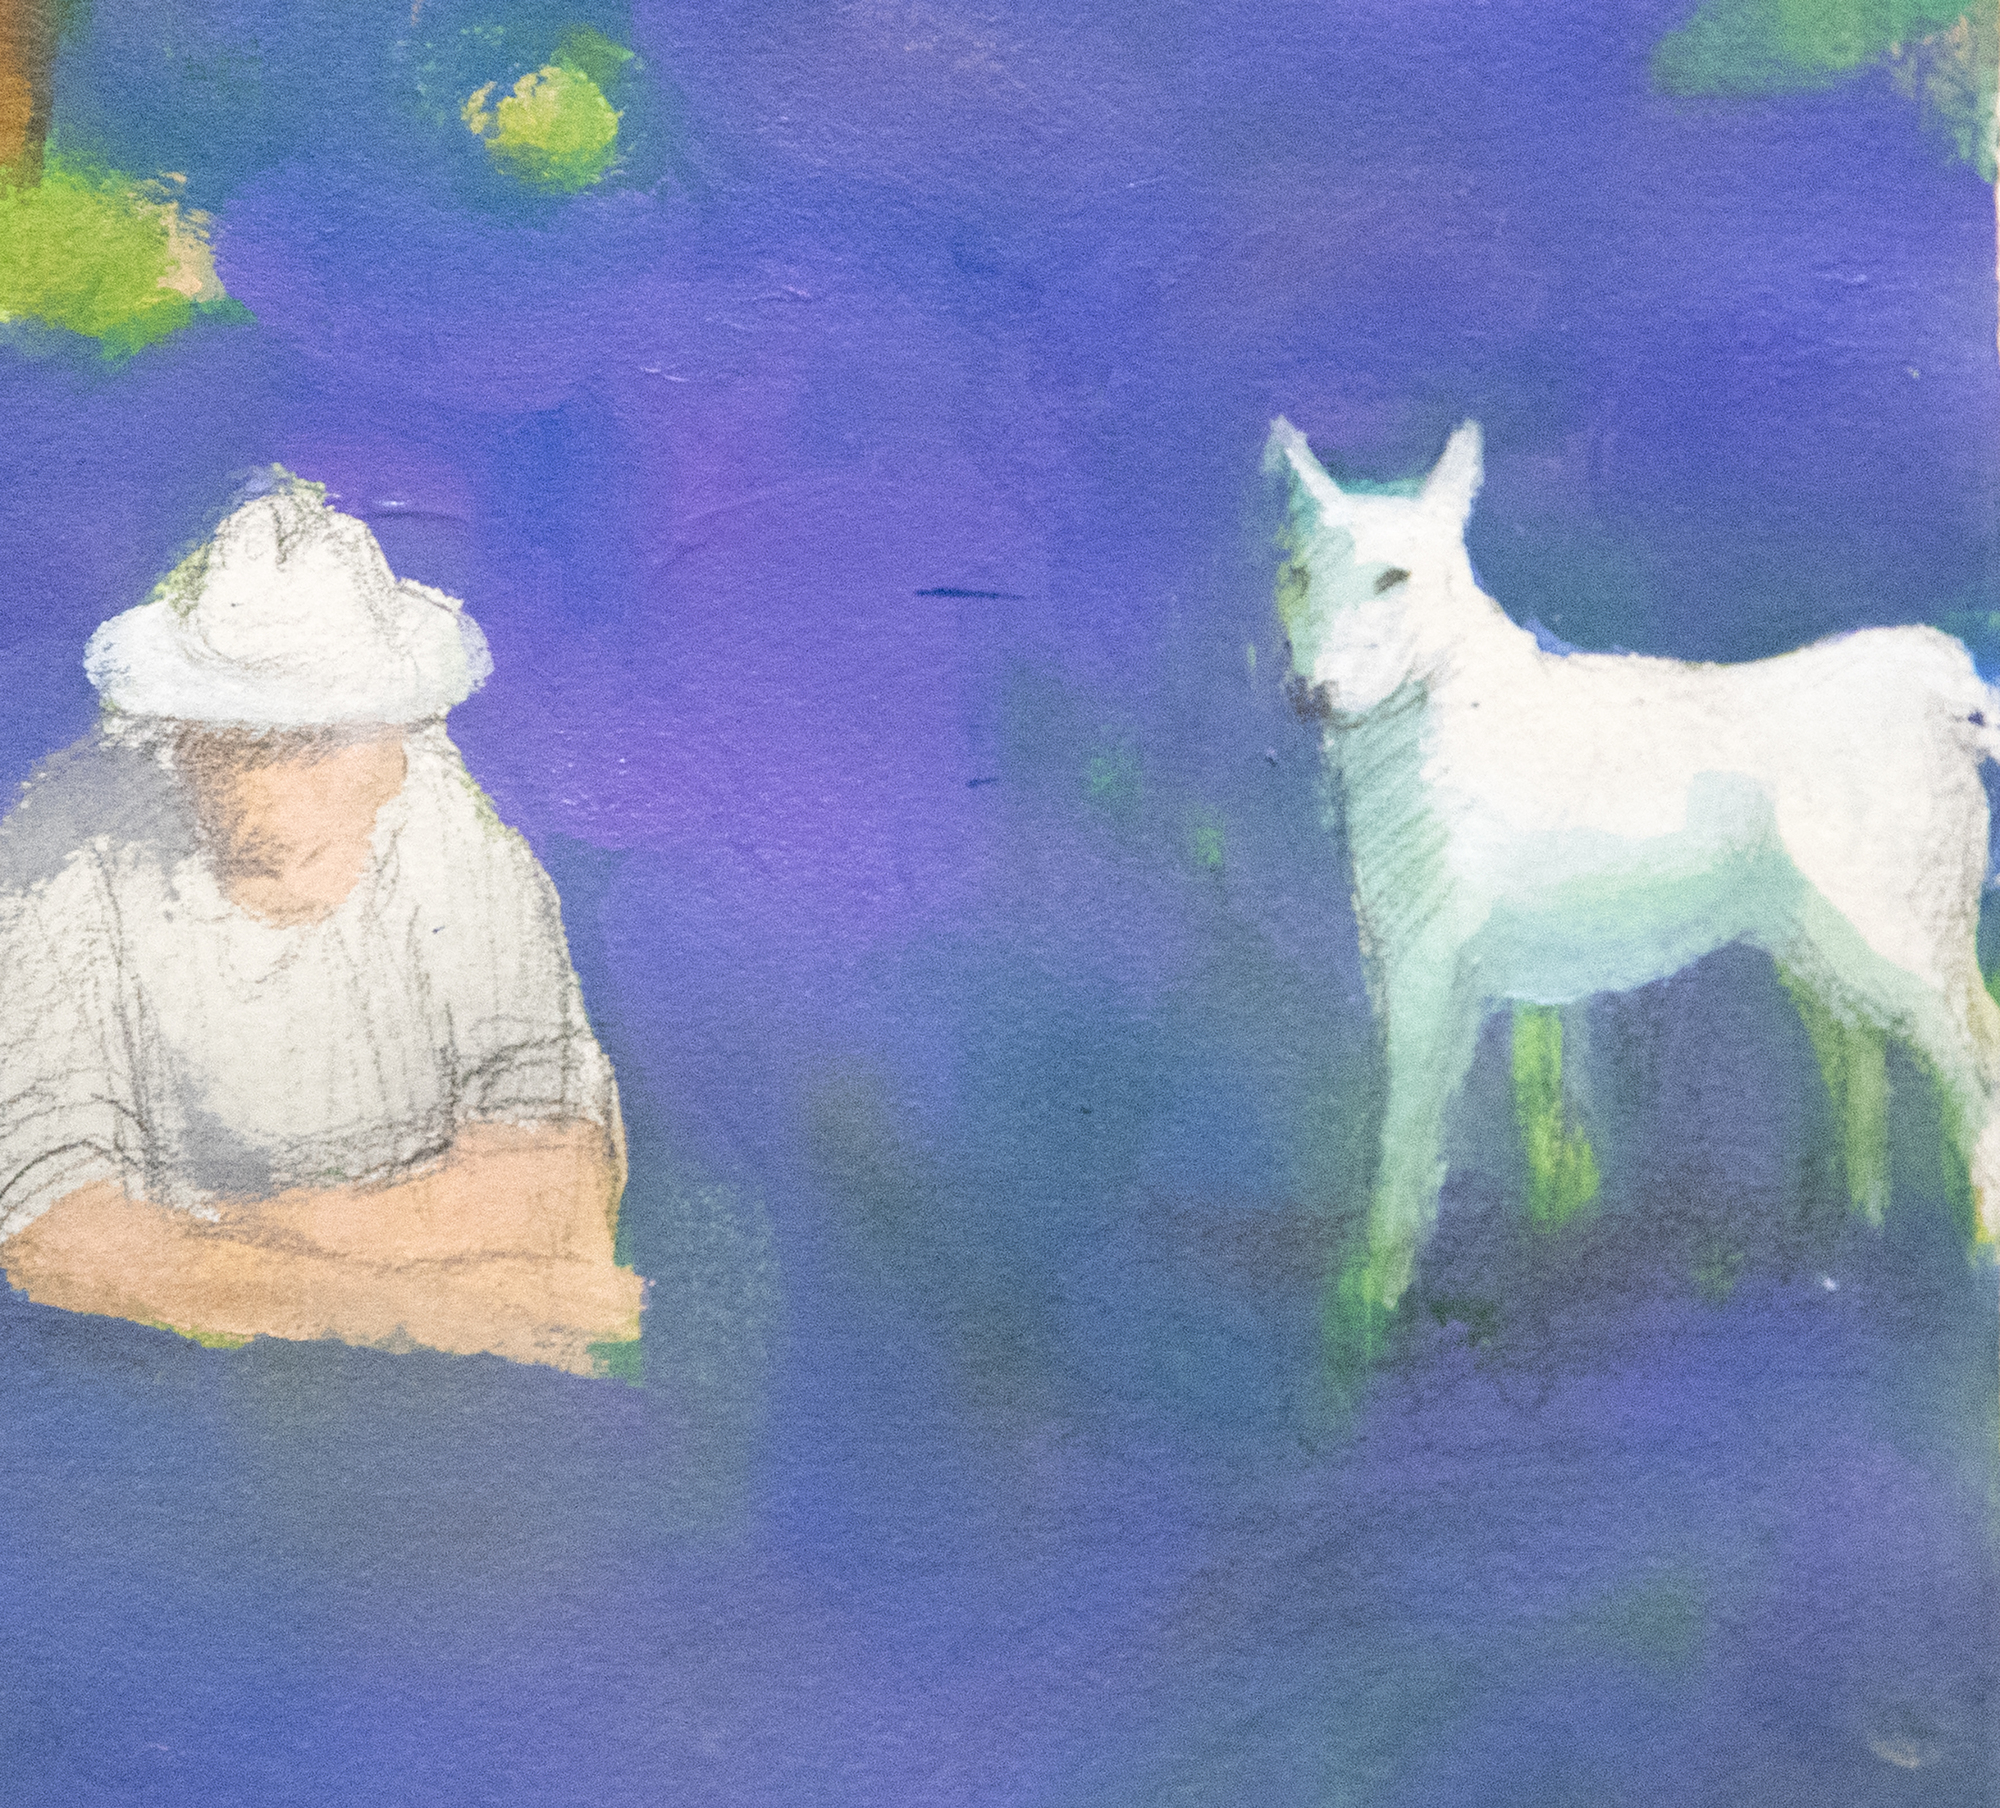 PAUL WONNER - Park with Figures Around a Tree - acrylic and pencil on paper - 22 1/4 x 30 in.